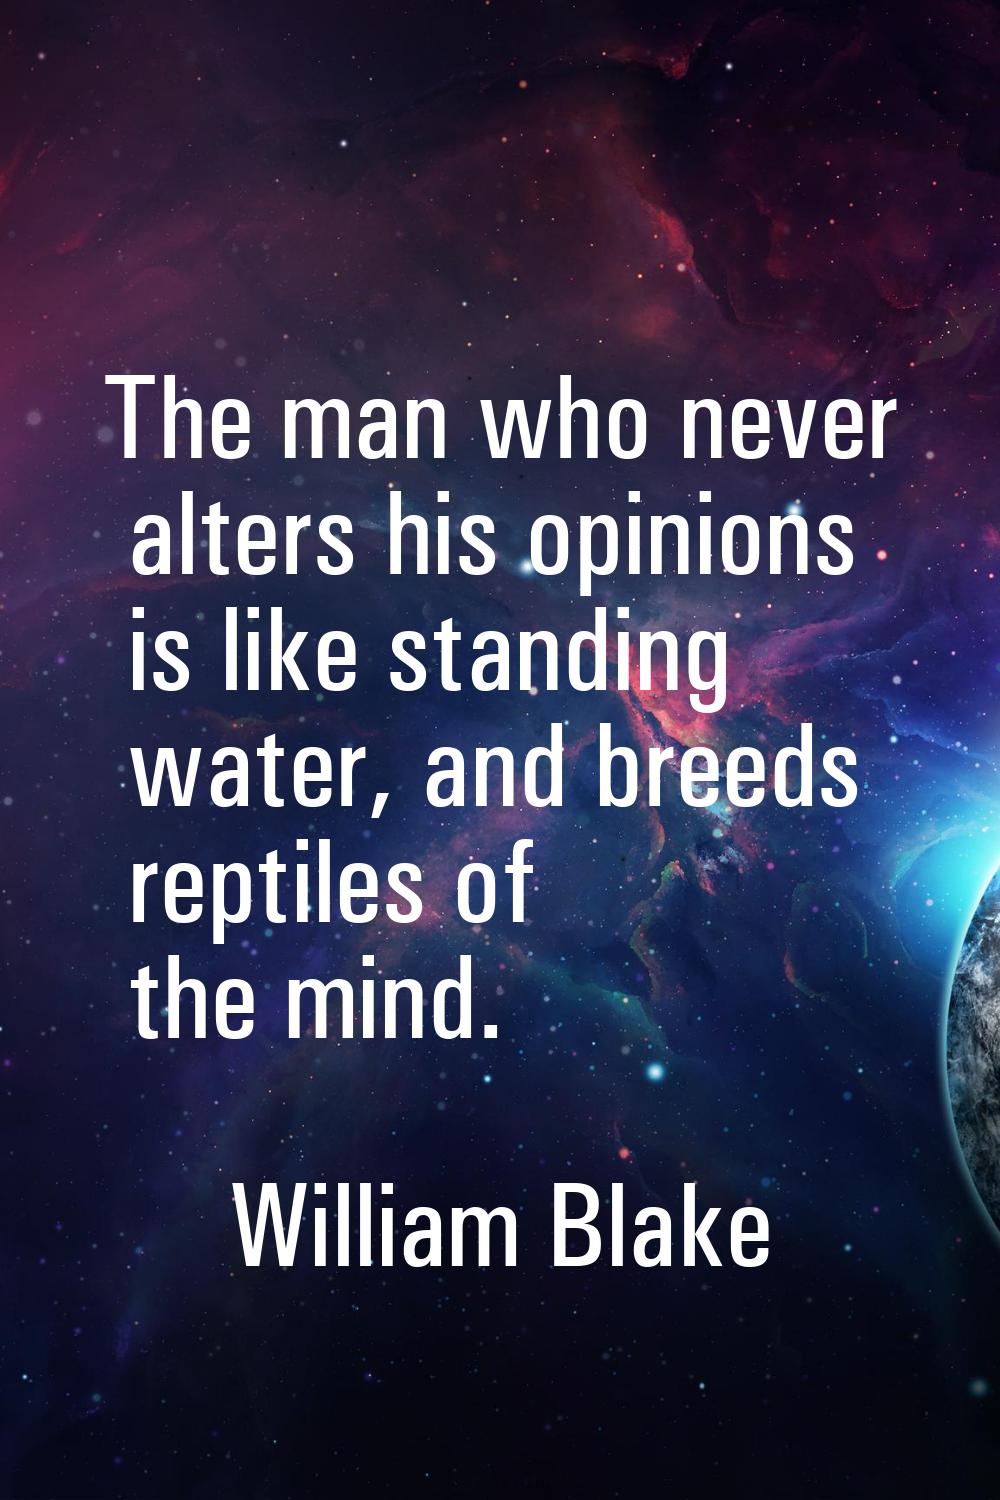 The man who never alters his opinions is like standing water, and breeds reptiles of the mind.